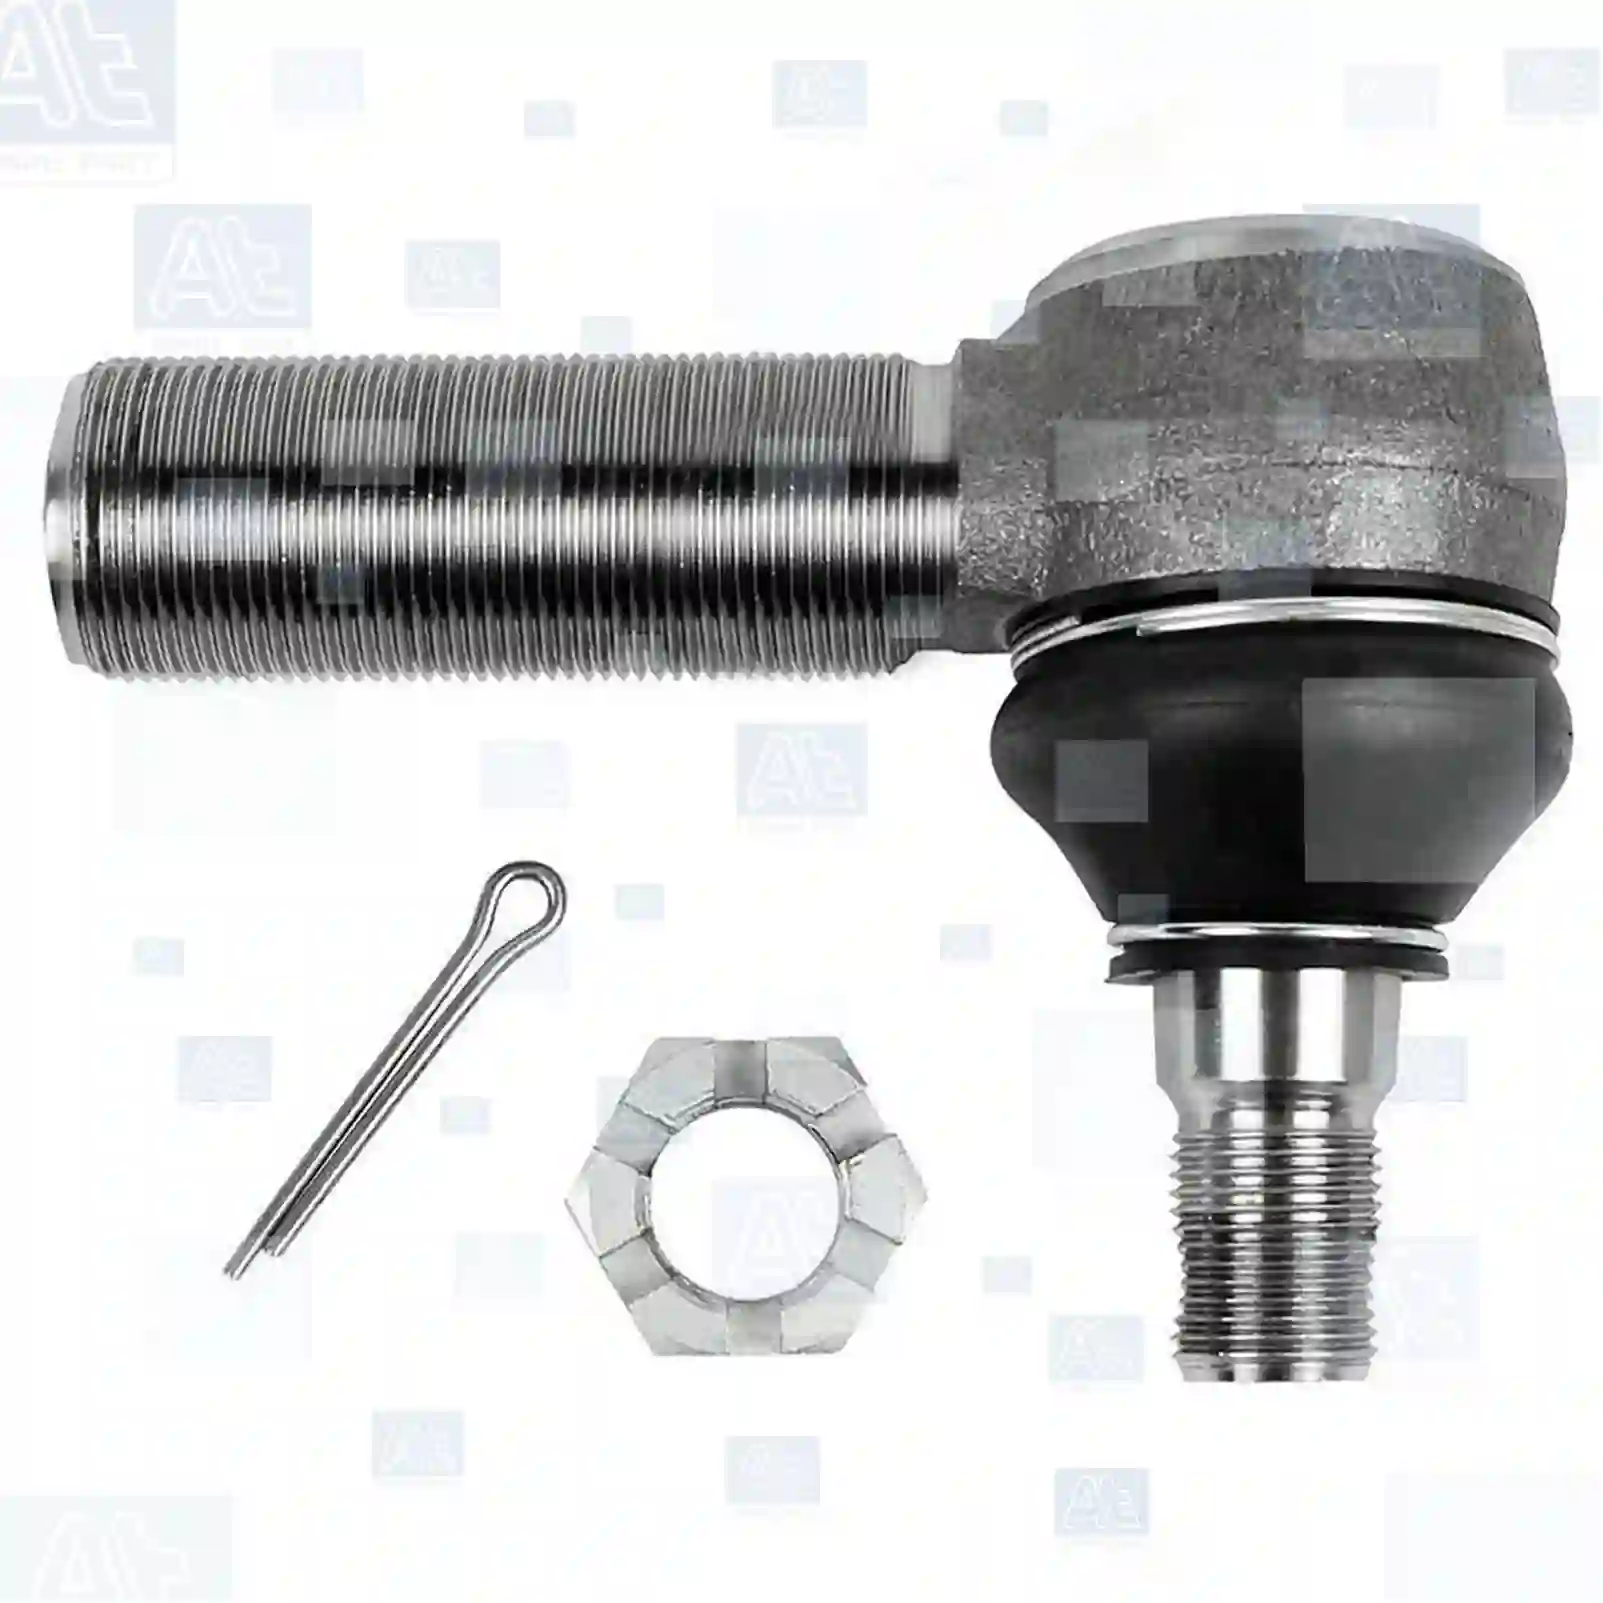 Ball joint, left hand thread, at no 77705367, oem no: 0110196, 0607452, 110196, 1373137, 607452, ACU9241, 02969507, 04833826, 08123394, 08193646, 08558536, 42484887, 02969507, 04833826, 08123394, 08193646, 08558536, 2969507, 42484887, 4833826, 8123394, 8193646, 8558536, 81953010079, 81953016139, 81953016222, 81953016315, 81953016329, 81953016359, 0003303335, 0003307235, 0003309435, 0003309635, 0023301235, 3443307235, 120325702, 5000559336, 5000823947, 5000823997, 5001825927, 1517279, 1517439, 1517493, 1695511, 1698190, ZG40355-0008 At Spare Part | Engine, Accelerator Pedal, Camshaft, Connecting Rod, Crankcase, Crankshaft, Cylinder Head, Engine Suspension Mountings, Exhaust Manifold, Exhaust Gas Recirculation, Filter Kits, Flywheel Housing, General Overhaul Kits, Engine, Intake Manifold, Oil Cleaner, Oil Cooler, Oil Filter, Oil Pump, Oil Sump, Piston & Liner, Sensor & Switch, Timing Case, Turbocharger, Cooling System, Belt Tensioner, Coolant Filter, Coolant Pipe, Corrosion Prevention Agent, Drive, Expansion Tank, Fan, Intercooler, Monitors & Gauges, Radiator, Thermostat, V-Belt / Timing belt, Water Pump, Fuel System, Electronical Injector Unit, Feed Pump, Fuel Filter, cpl., Fuel Gauge Sender,  Fuel Line, Fuel Pump, Fuel Tank, Injection Line Kit, Injection Pump, Exhaust System, Clutch & Pedal, Gearbox, Propeller Shaft, Axles, Brake System, Hubs & Wheels, Suspension, Leaf Spring, Universal Parts / Accessories, Steering, Electrical System, Cabin Ball joint, left hand thread, at no 77705367, oem no: 0110196, 0607452, 110196, 1373137, 607452, ACU9241, 02969507, 04833826, 08123394, 08193646, 08558536, 42484887, 02969507, 04833826, 08123394, 08193646, 08558536, 2969507, 42484887, 4833826, 8123394, 8193646, 8558536, 81953010079, 81953016139, 81953016222, 81953016315, 81953016329, 81953016359, 0003303335, 0003307235, 0003309435, 0003309635, 0023301235, 3443307235, 120325702, 5000559336, 5000823947, 5000823997, 5001825927, 1517279, 1517439, 1517493, 1695511, 1698190, ZG40355-0008 At Spare Part | Engine, Accelerator Pedal, Camshaft, Connecting Rod, Crankcase, Crankshaft, Cylinder Head, Engine Suspension Mountings, Exhaust Manifold, Exhaust Gas Recirculation, Filter Kits, Flywheel Housing, General Overhaul Kits, Engine, Intake Manifold, Oil Cleaner, Oil Cooler, Oil Filter, Oil Pump, Oil Sump, Piston & Liner, Sensor & Switch, Timing Case, Turbocharger, Cooling System, Belt Tensioner, Coolant Filter, Coolant Pipe, Corrosion Prevention Agent, Drive, Expansion Tank, Fan, Intercooler, Monitors & Gauges, Radiator, Thermostat, V-Belt / Timing belt, Water Pump, Fuel System, Electronical Injector Unit, Feed Pump, Fuel Filter, cpl., Fuel Gauge Sender,  Fuel Line, Fuel Pump, Fuel Tank, Injection Line Kit, Injection Pump, Exhaust System, Clutch & Pedal, Gearbox, Propeller Shaft, Axles, Brake System, Hubs & Wheels, Suspension, Leaf Spring, Universal Parts / Accessories, Steering, Electrical System, Cabin